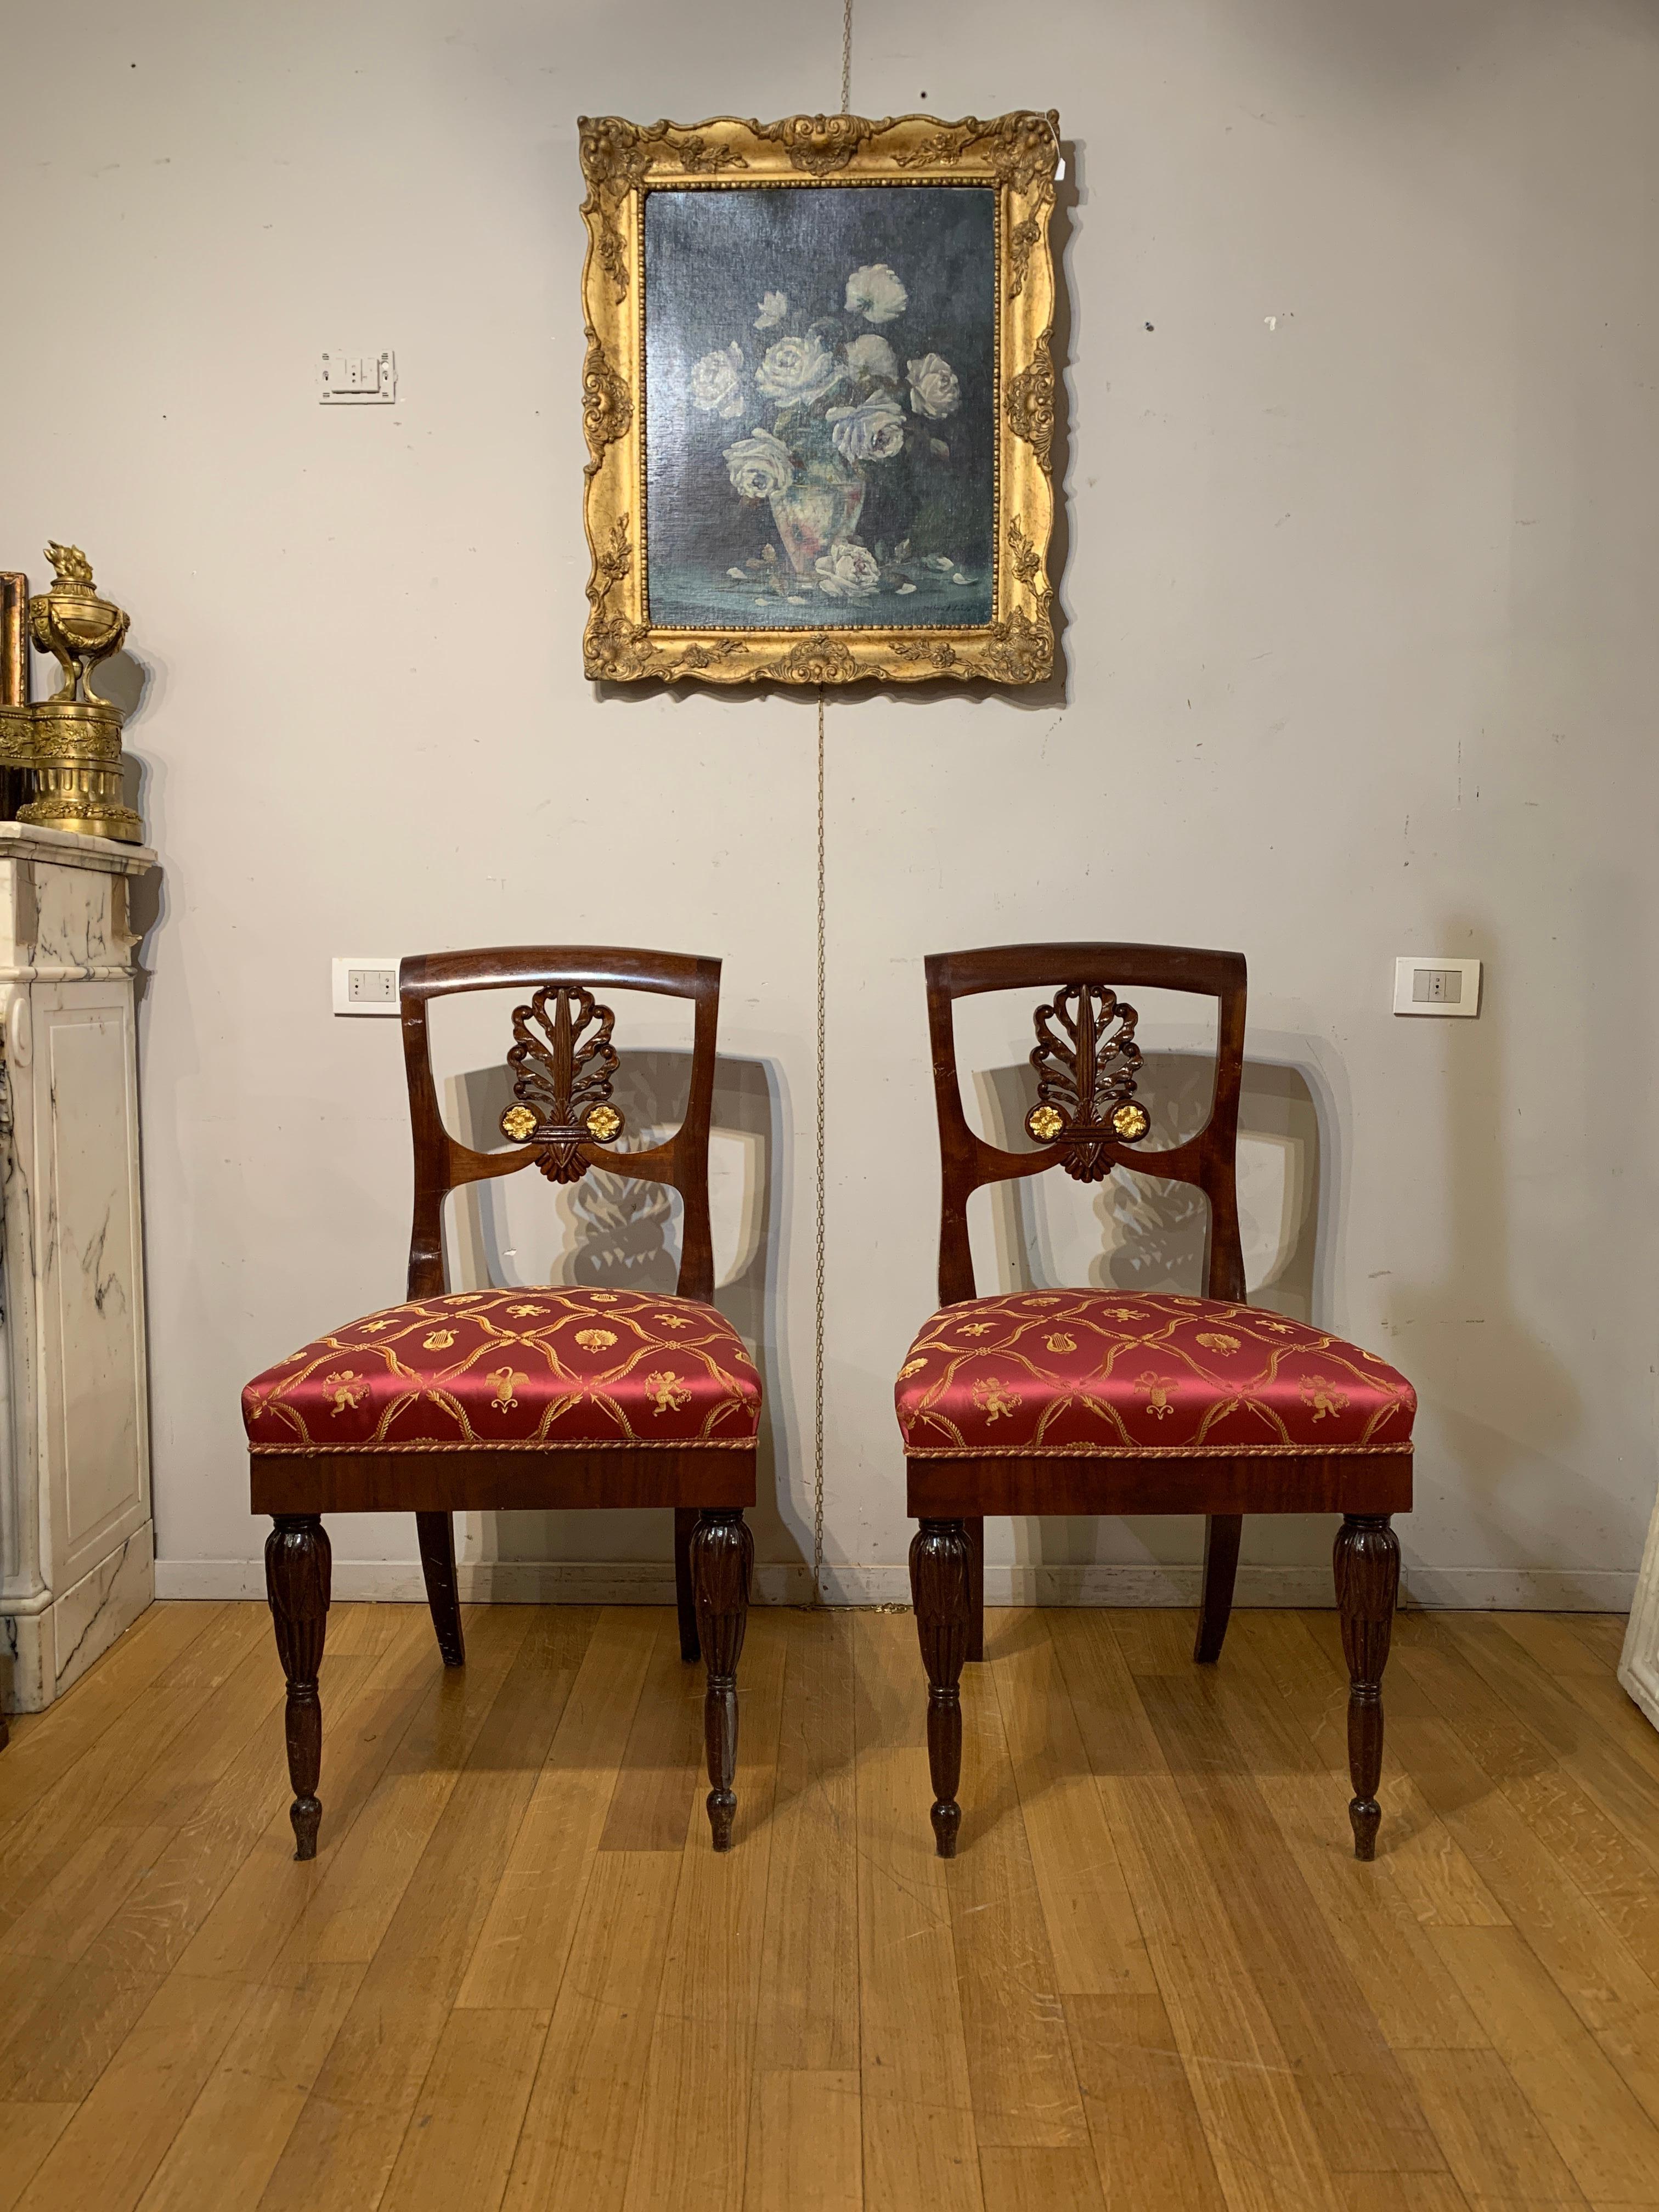 Elegant set of eight Empire style chairs, made of solid carved mahogany, with pure gold finishes. The front legs are shapely and straight, while the rear ones are flared, creating a unique visual balance. The back of the chairs is embellished with a